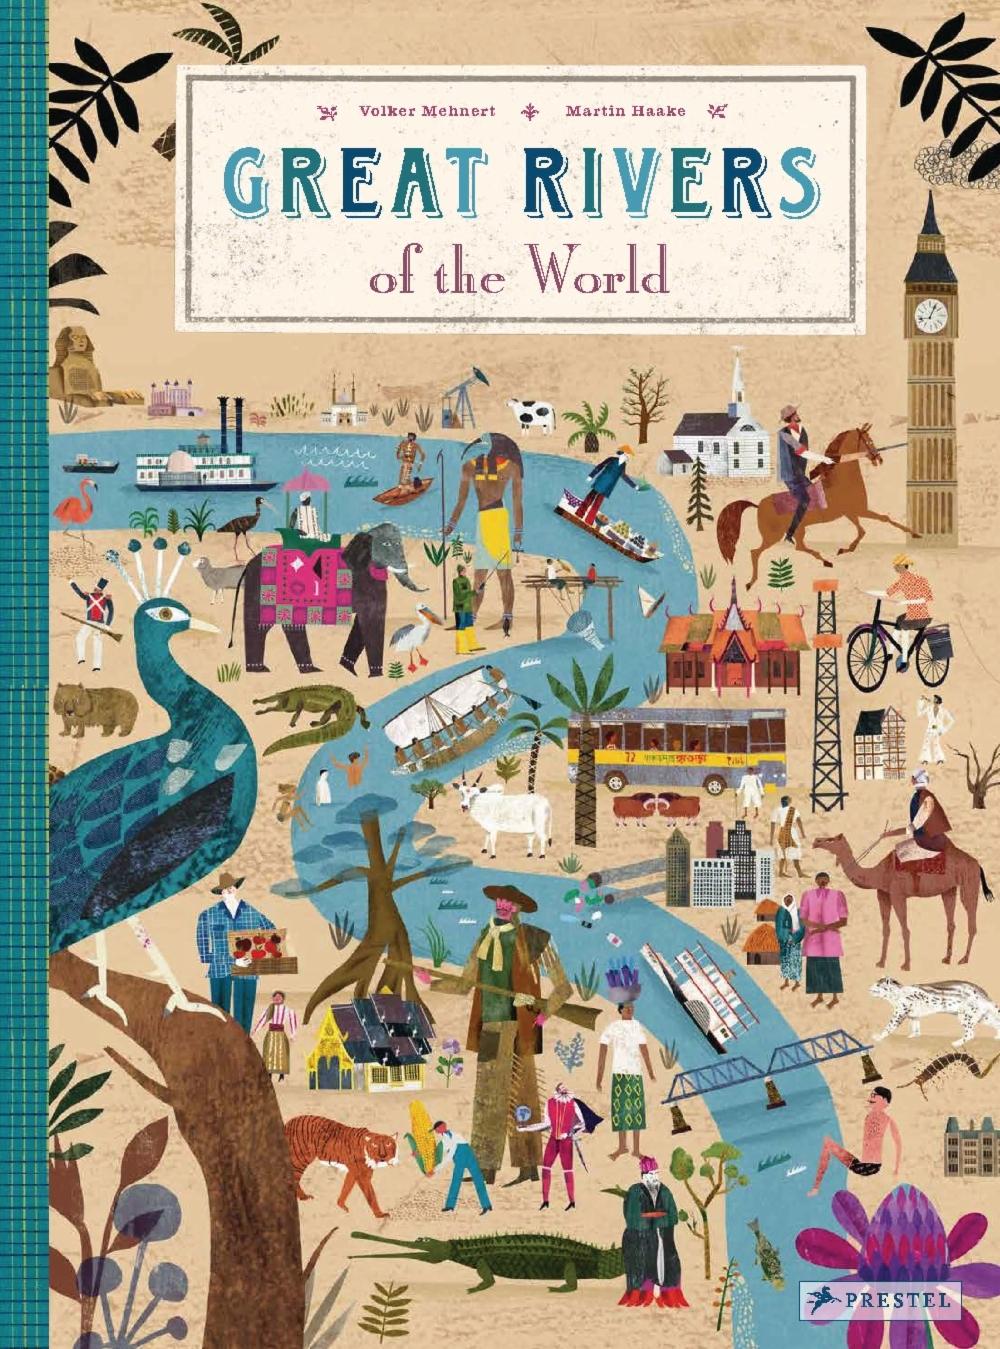 GREAT RIVERS OF THE WORLD